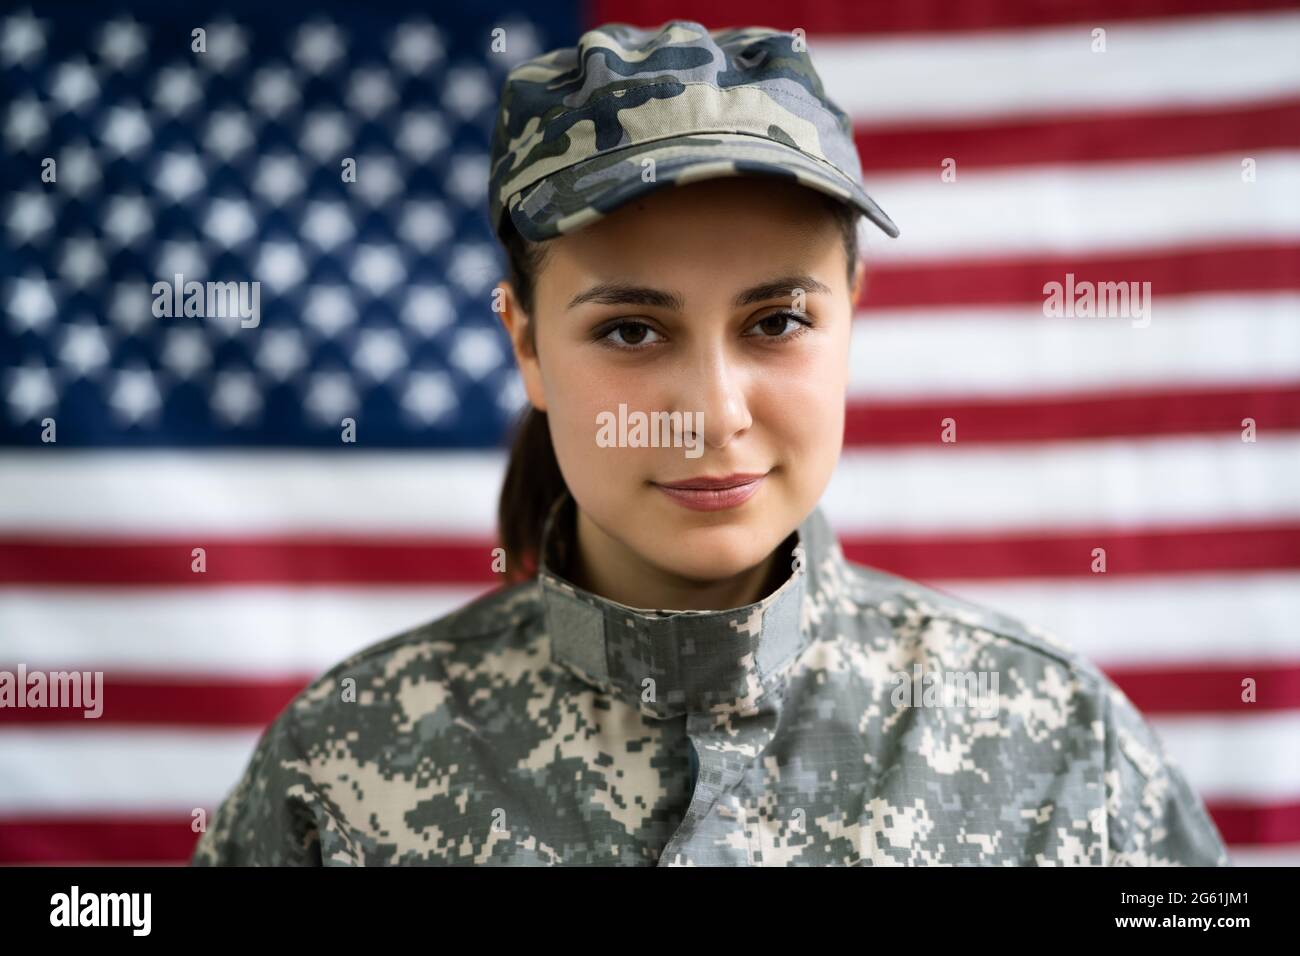 US Army Military Soldier Veteran Portrait With Flag Stock Photo